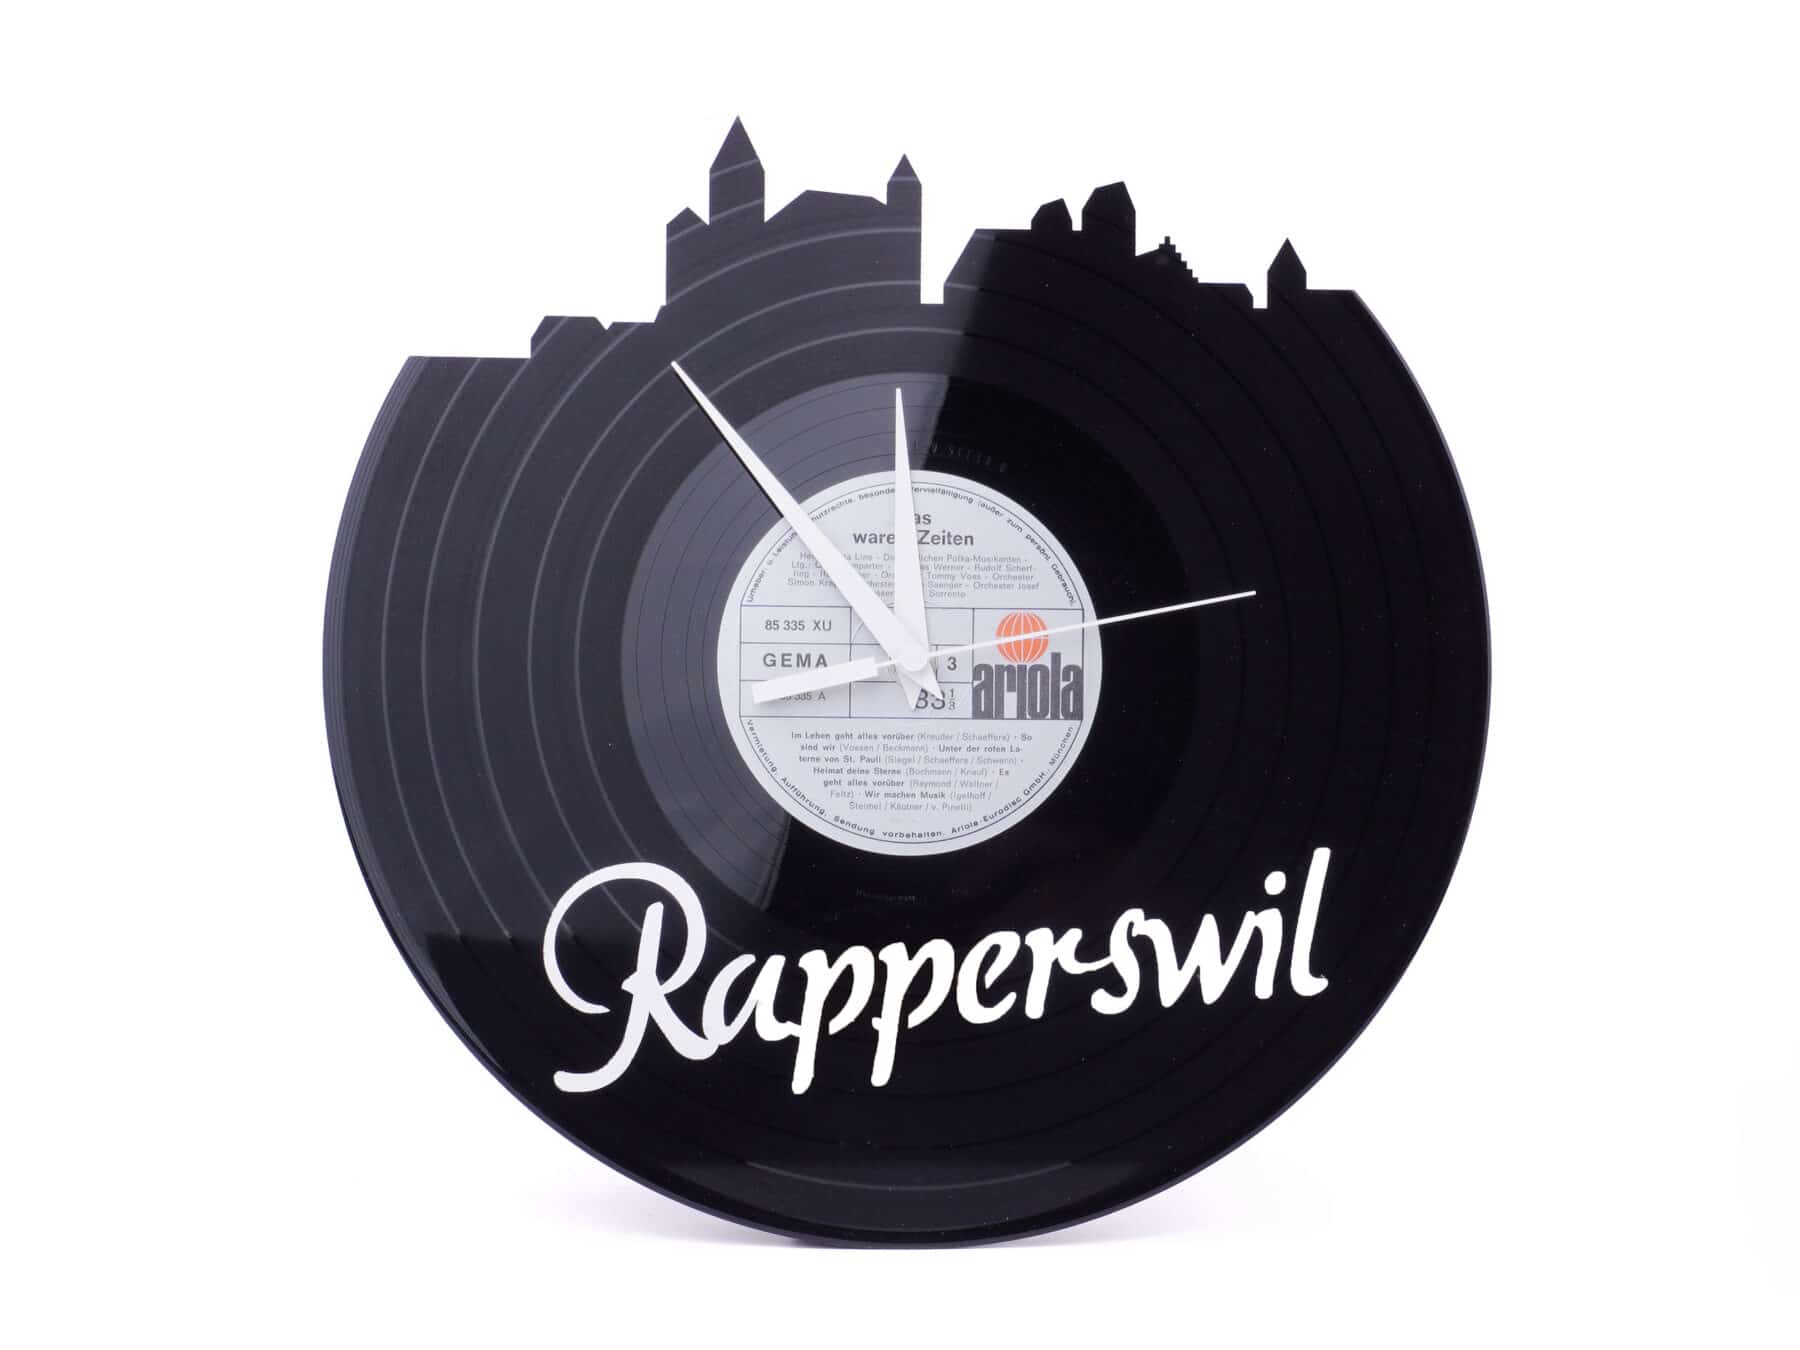 Schallplattenuhr Upcycling Stadt Rapperswil limited edition